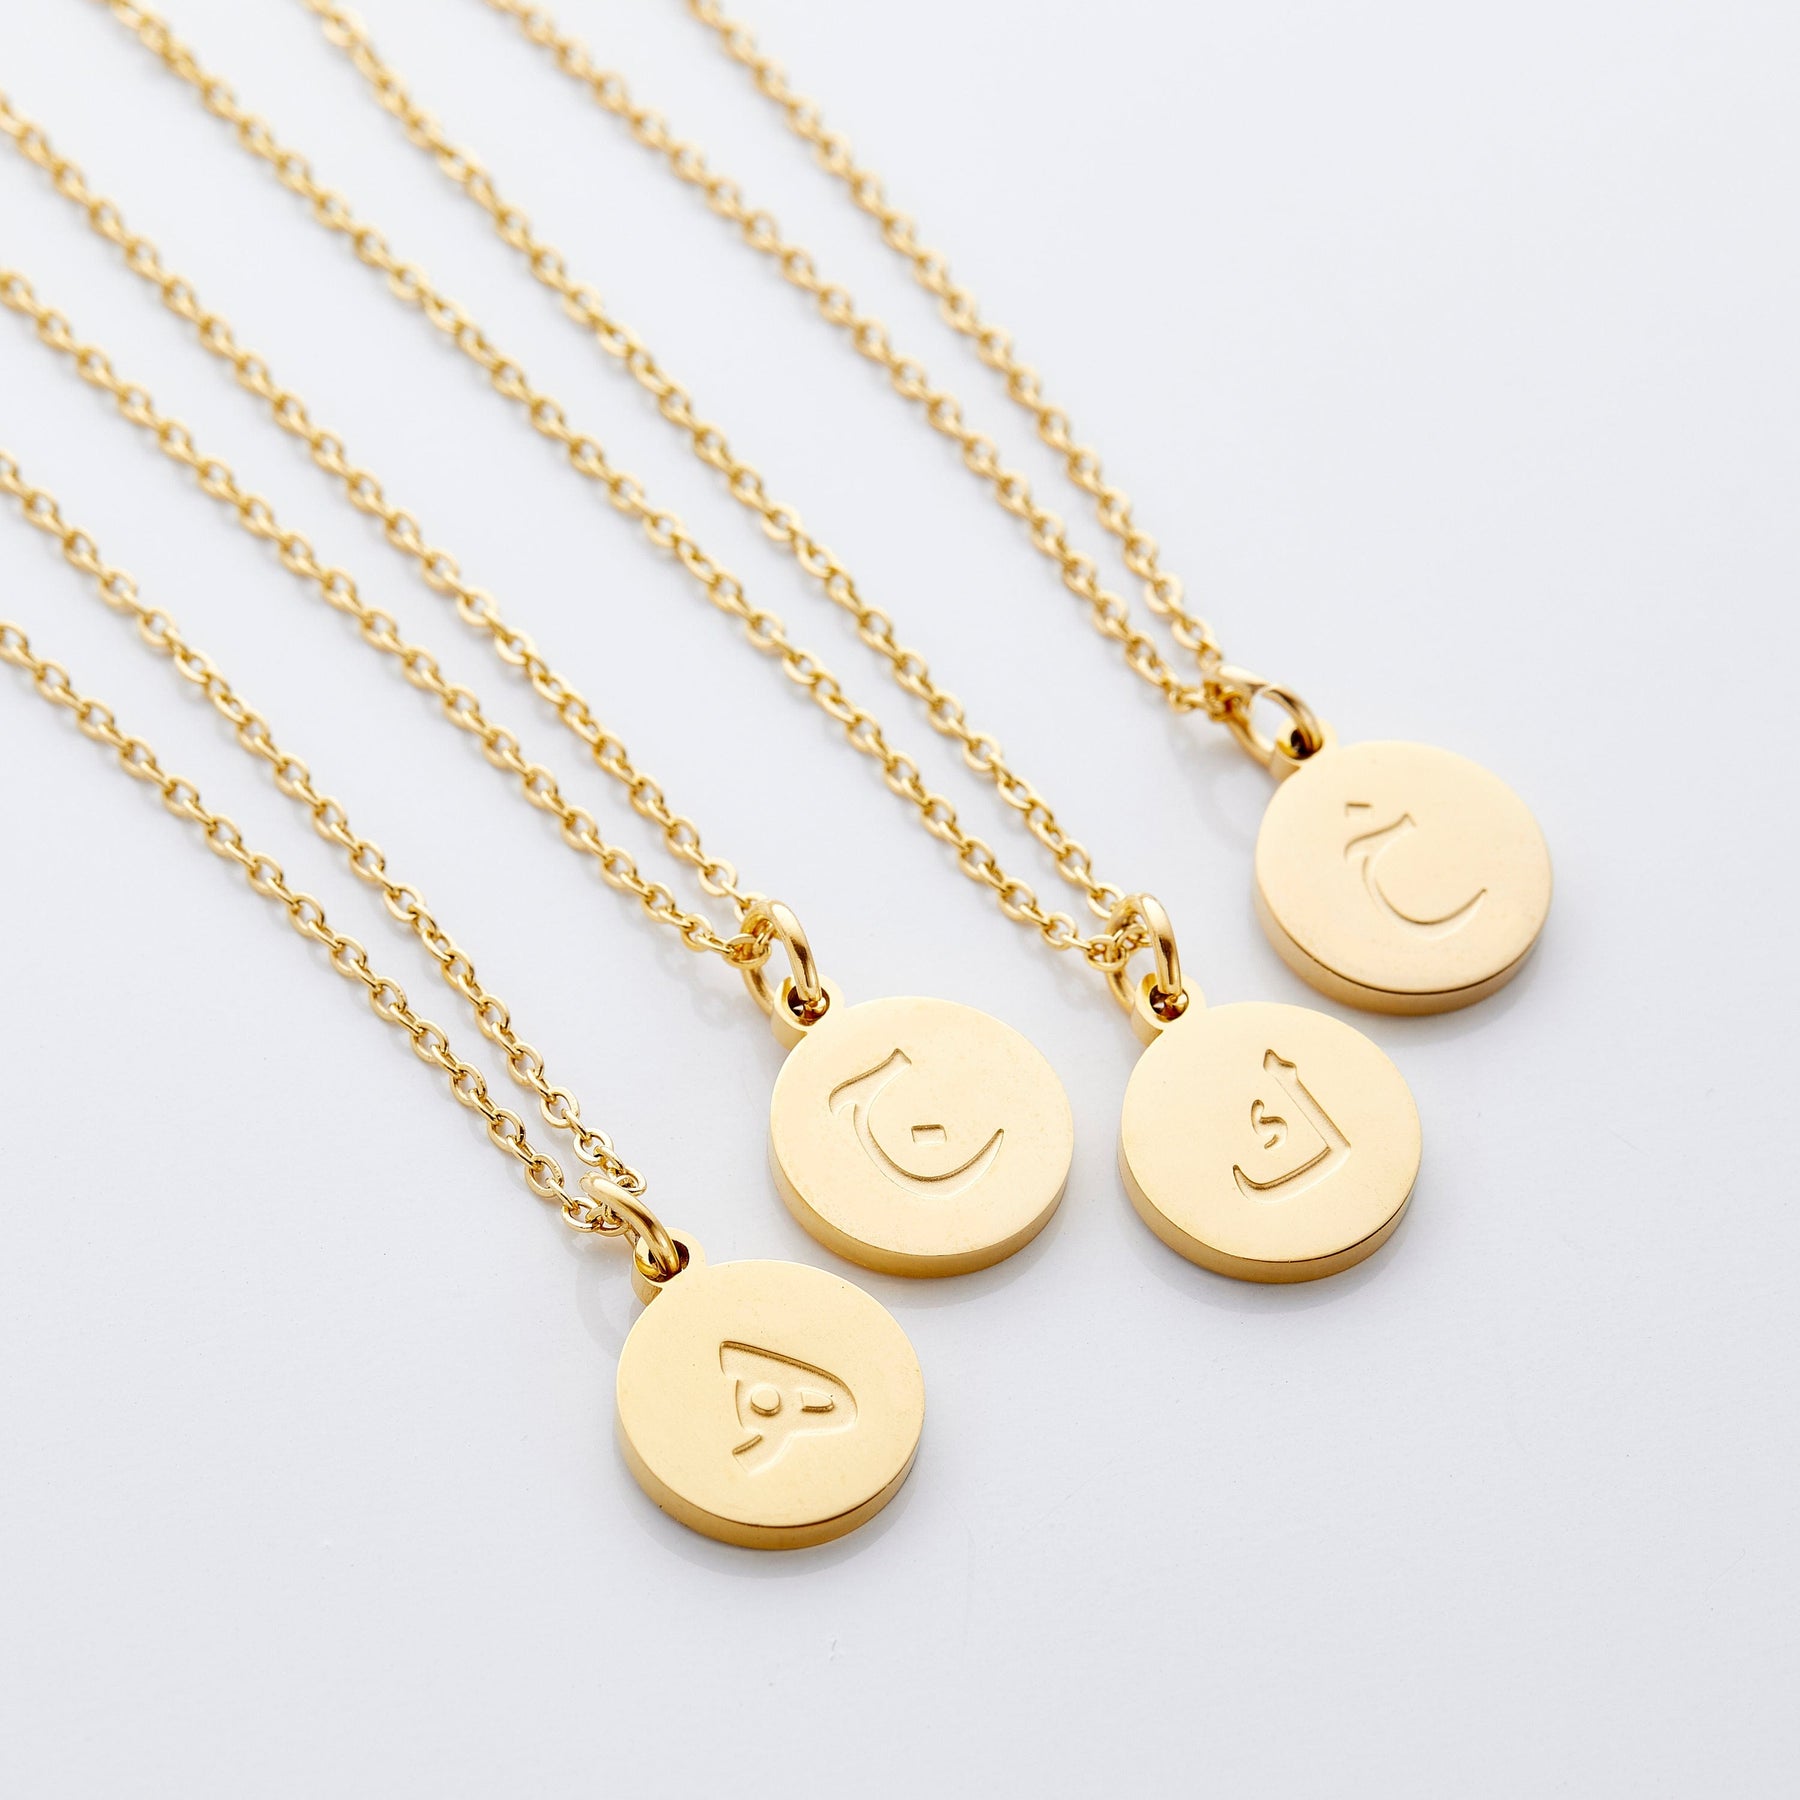 Personalised Arabic Letter Necklace - Jeluxa